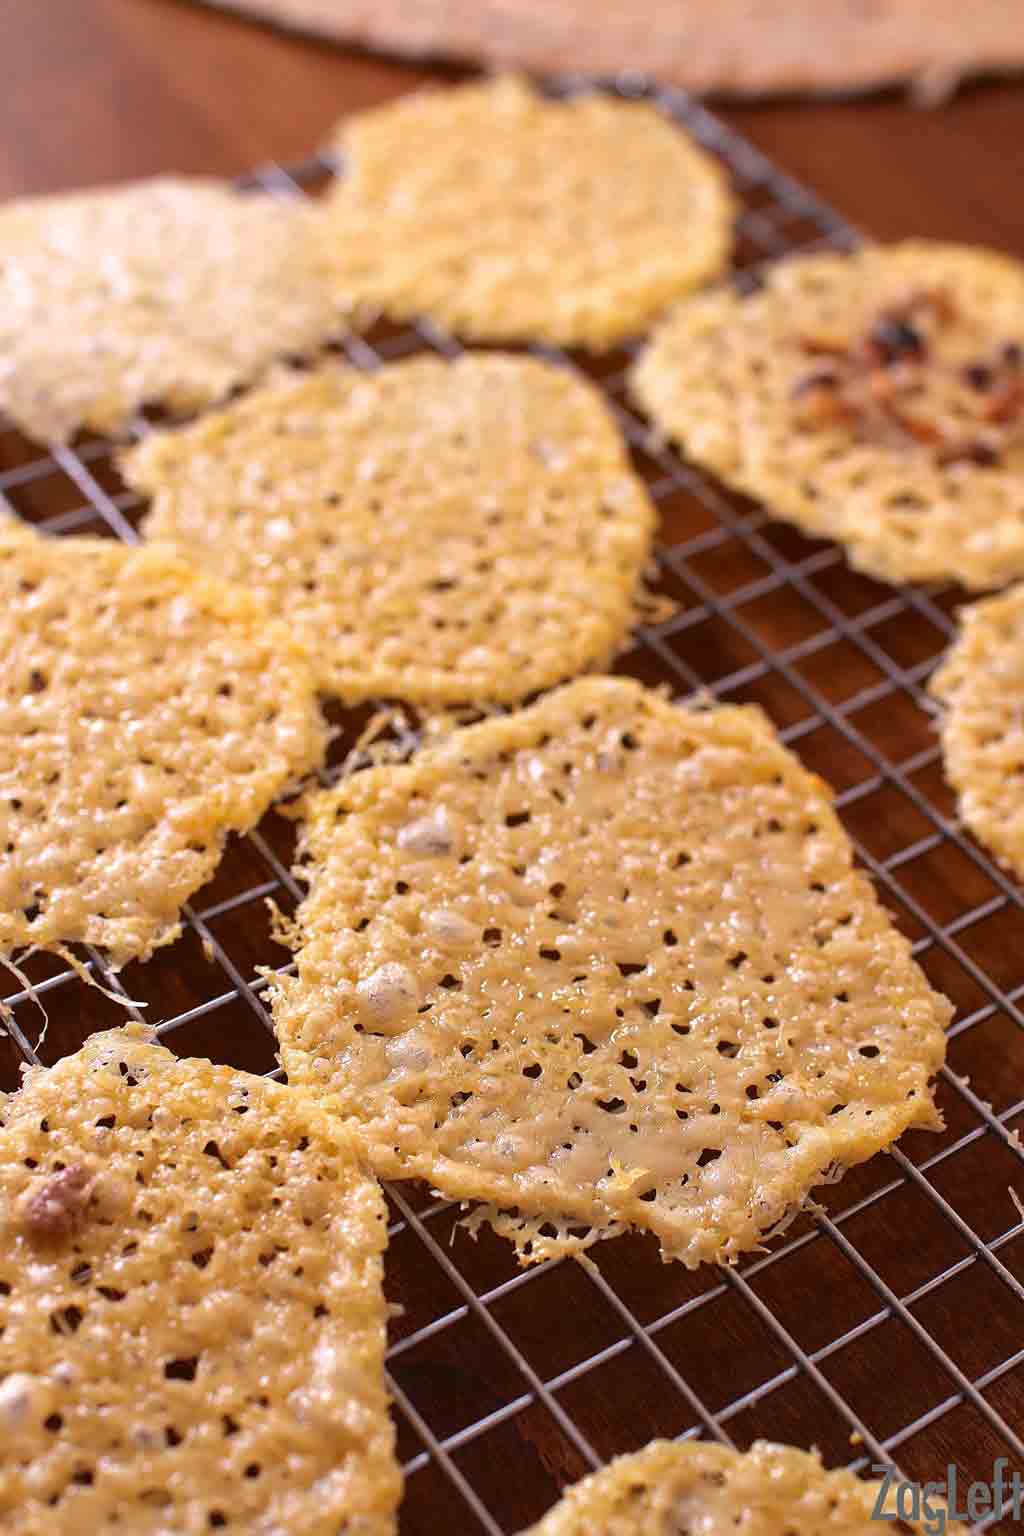 Parmesan cheese crisps on a cooling rack.